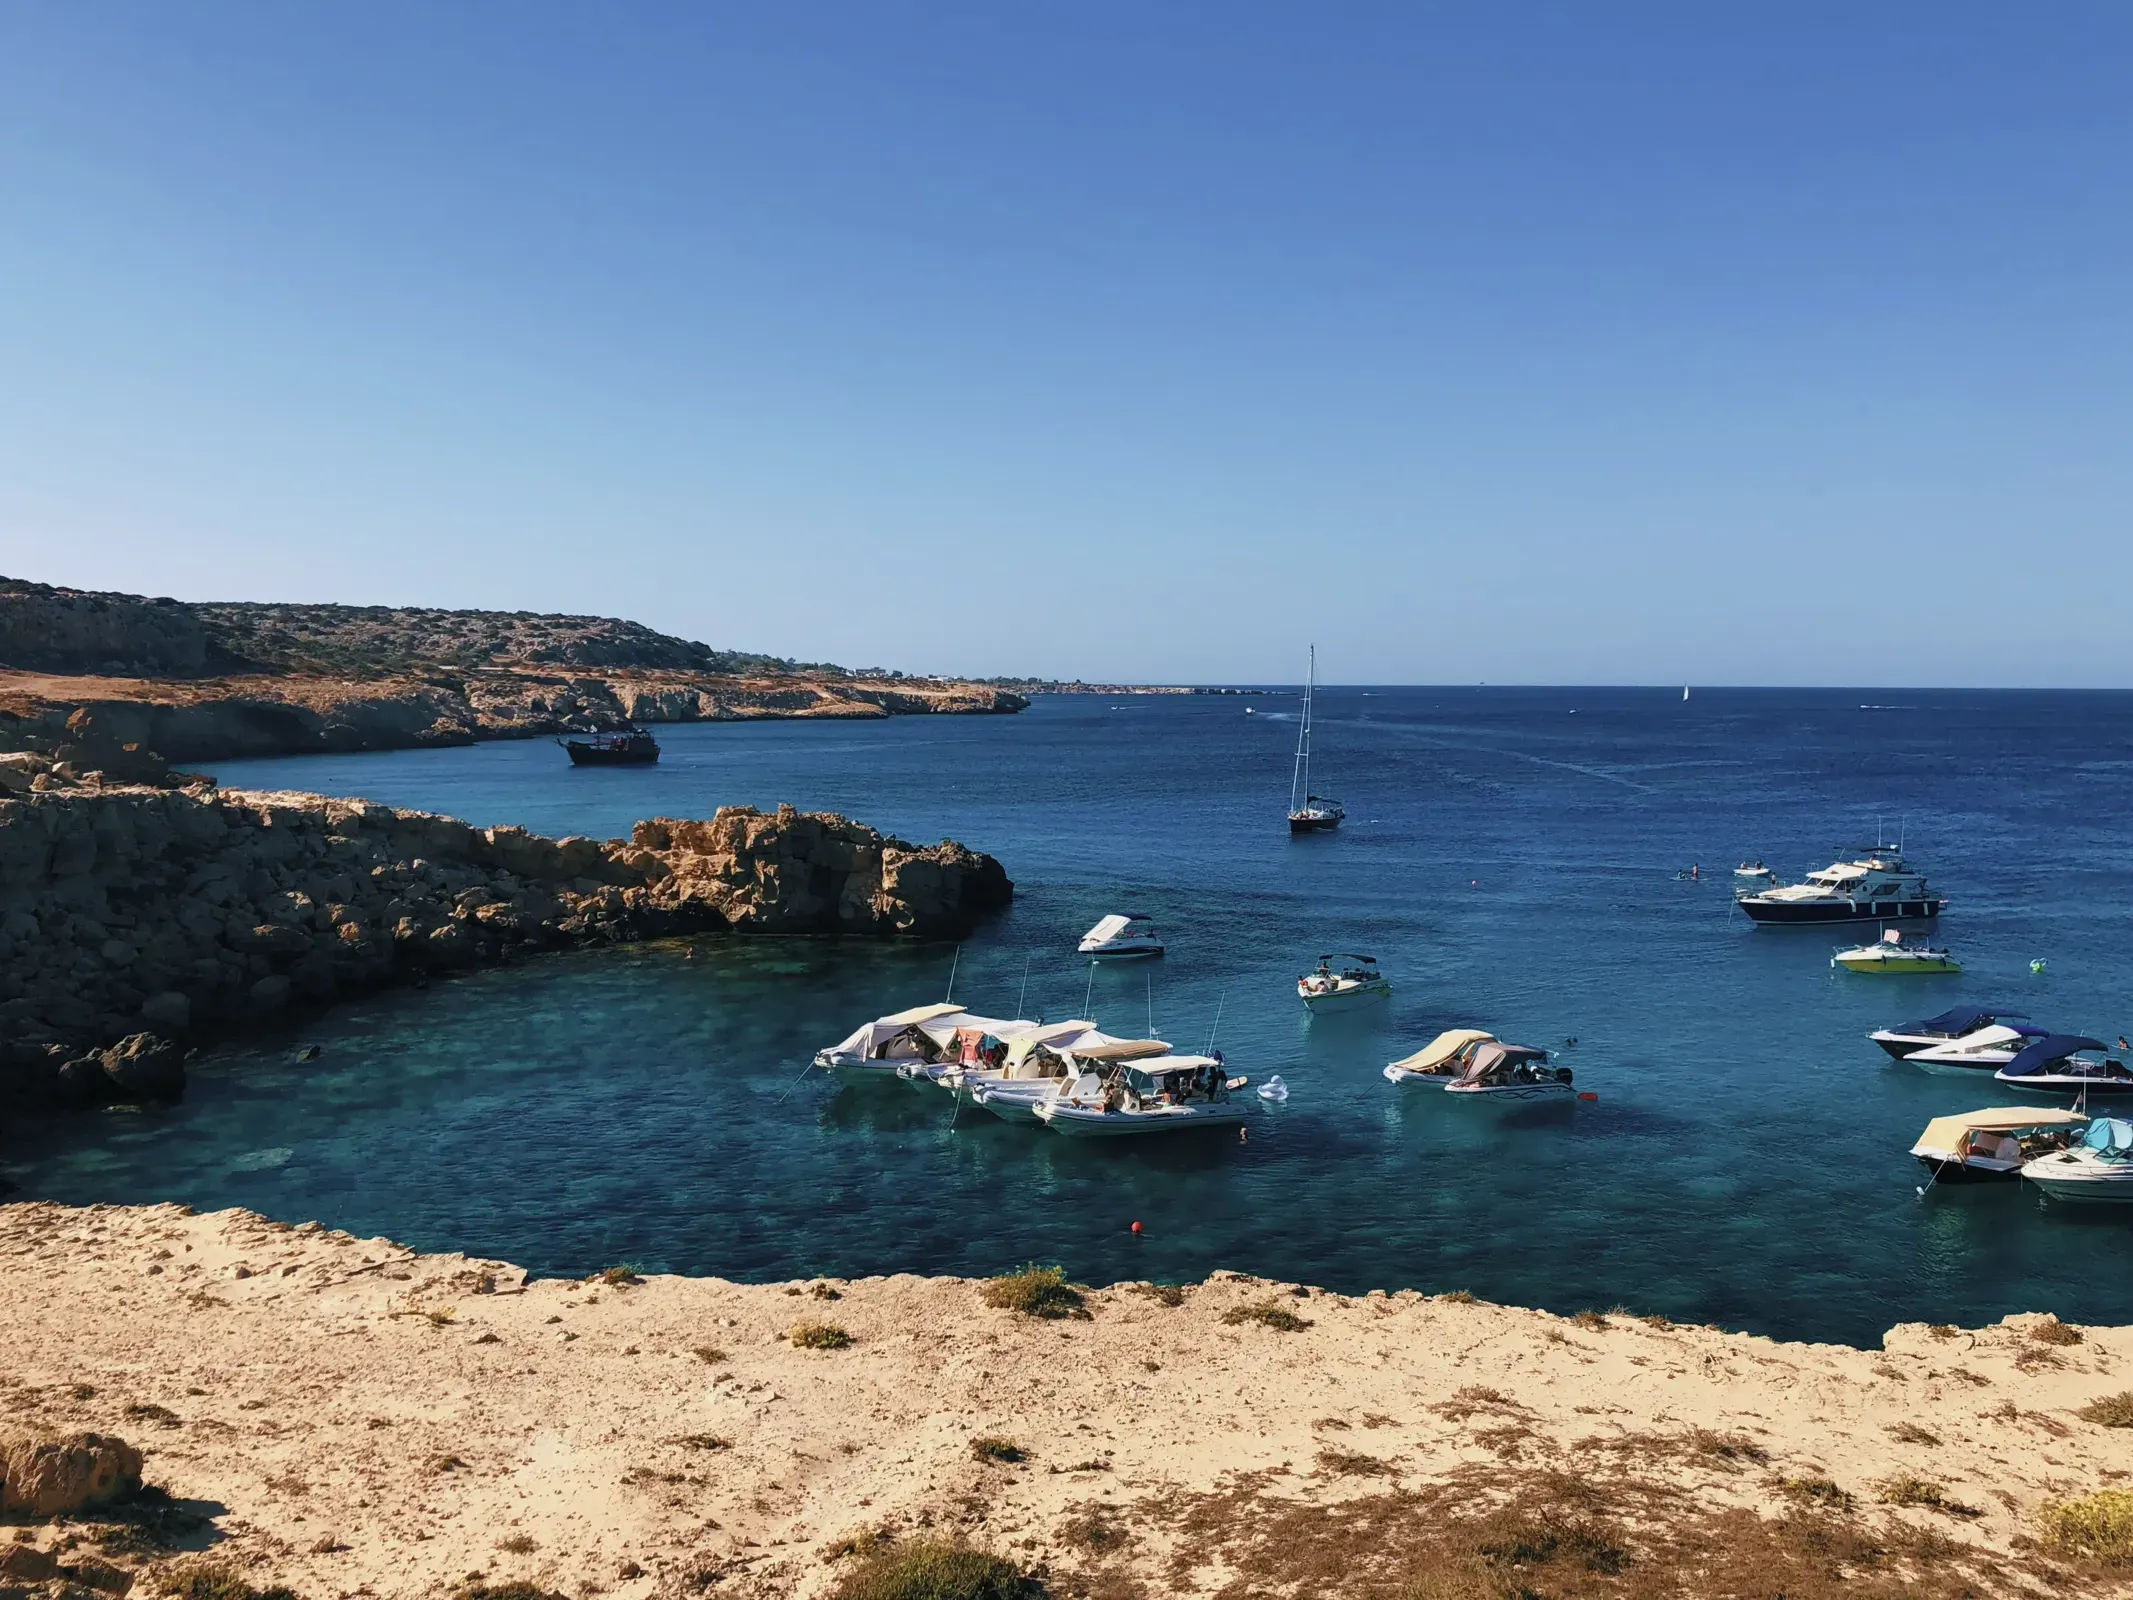 Boats on the water at Cape Greco National Park